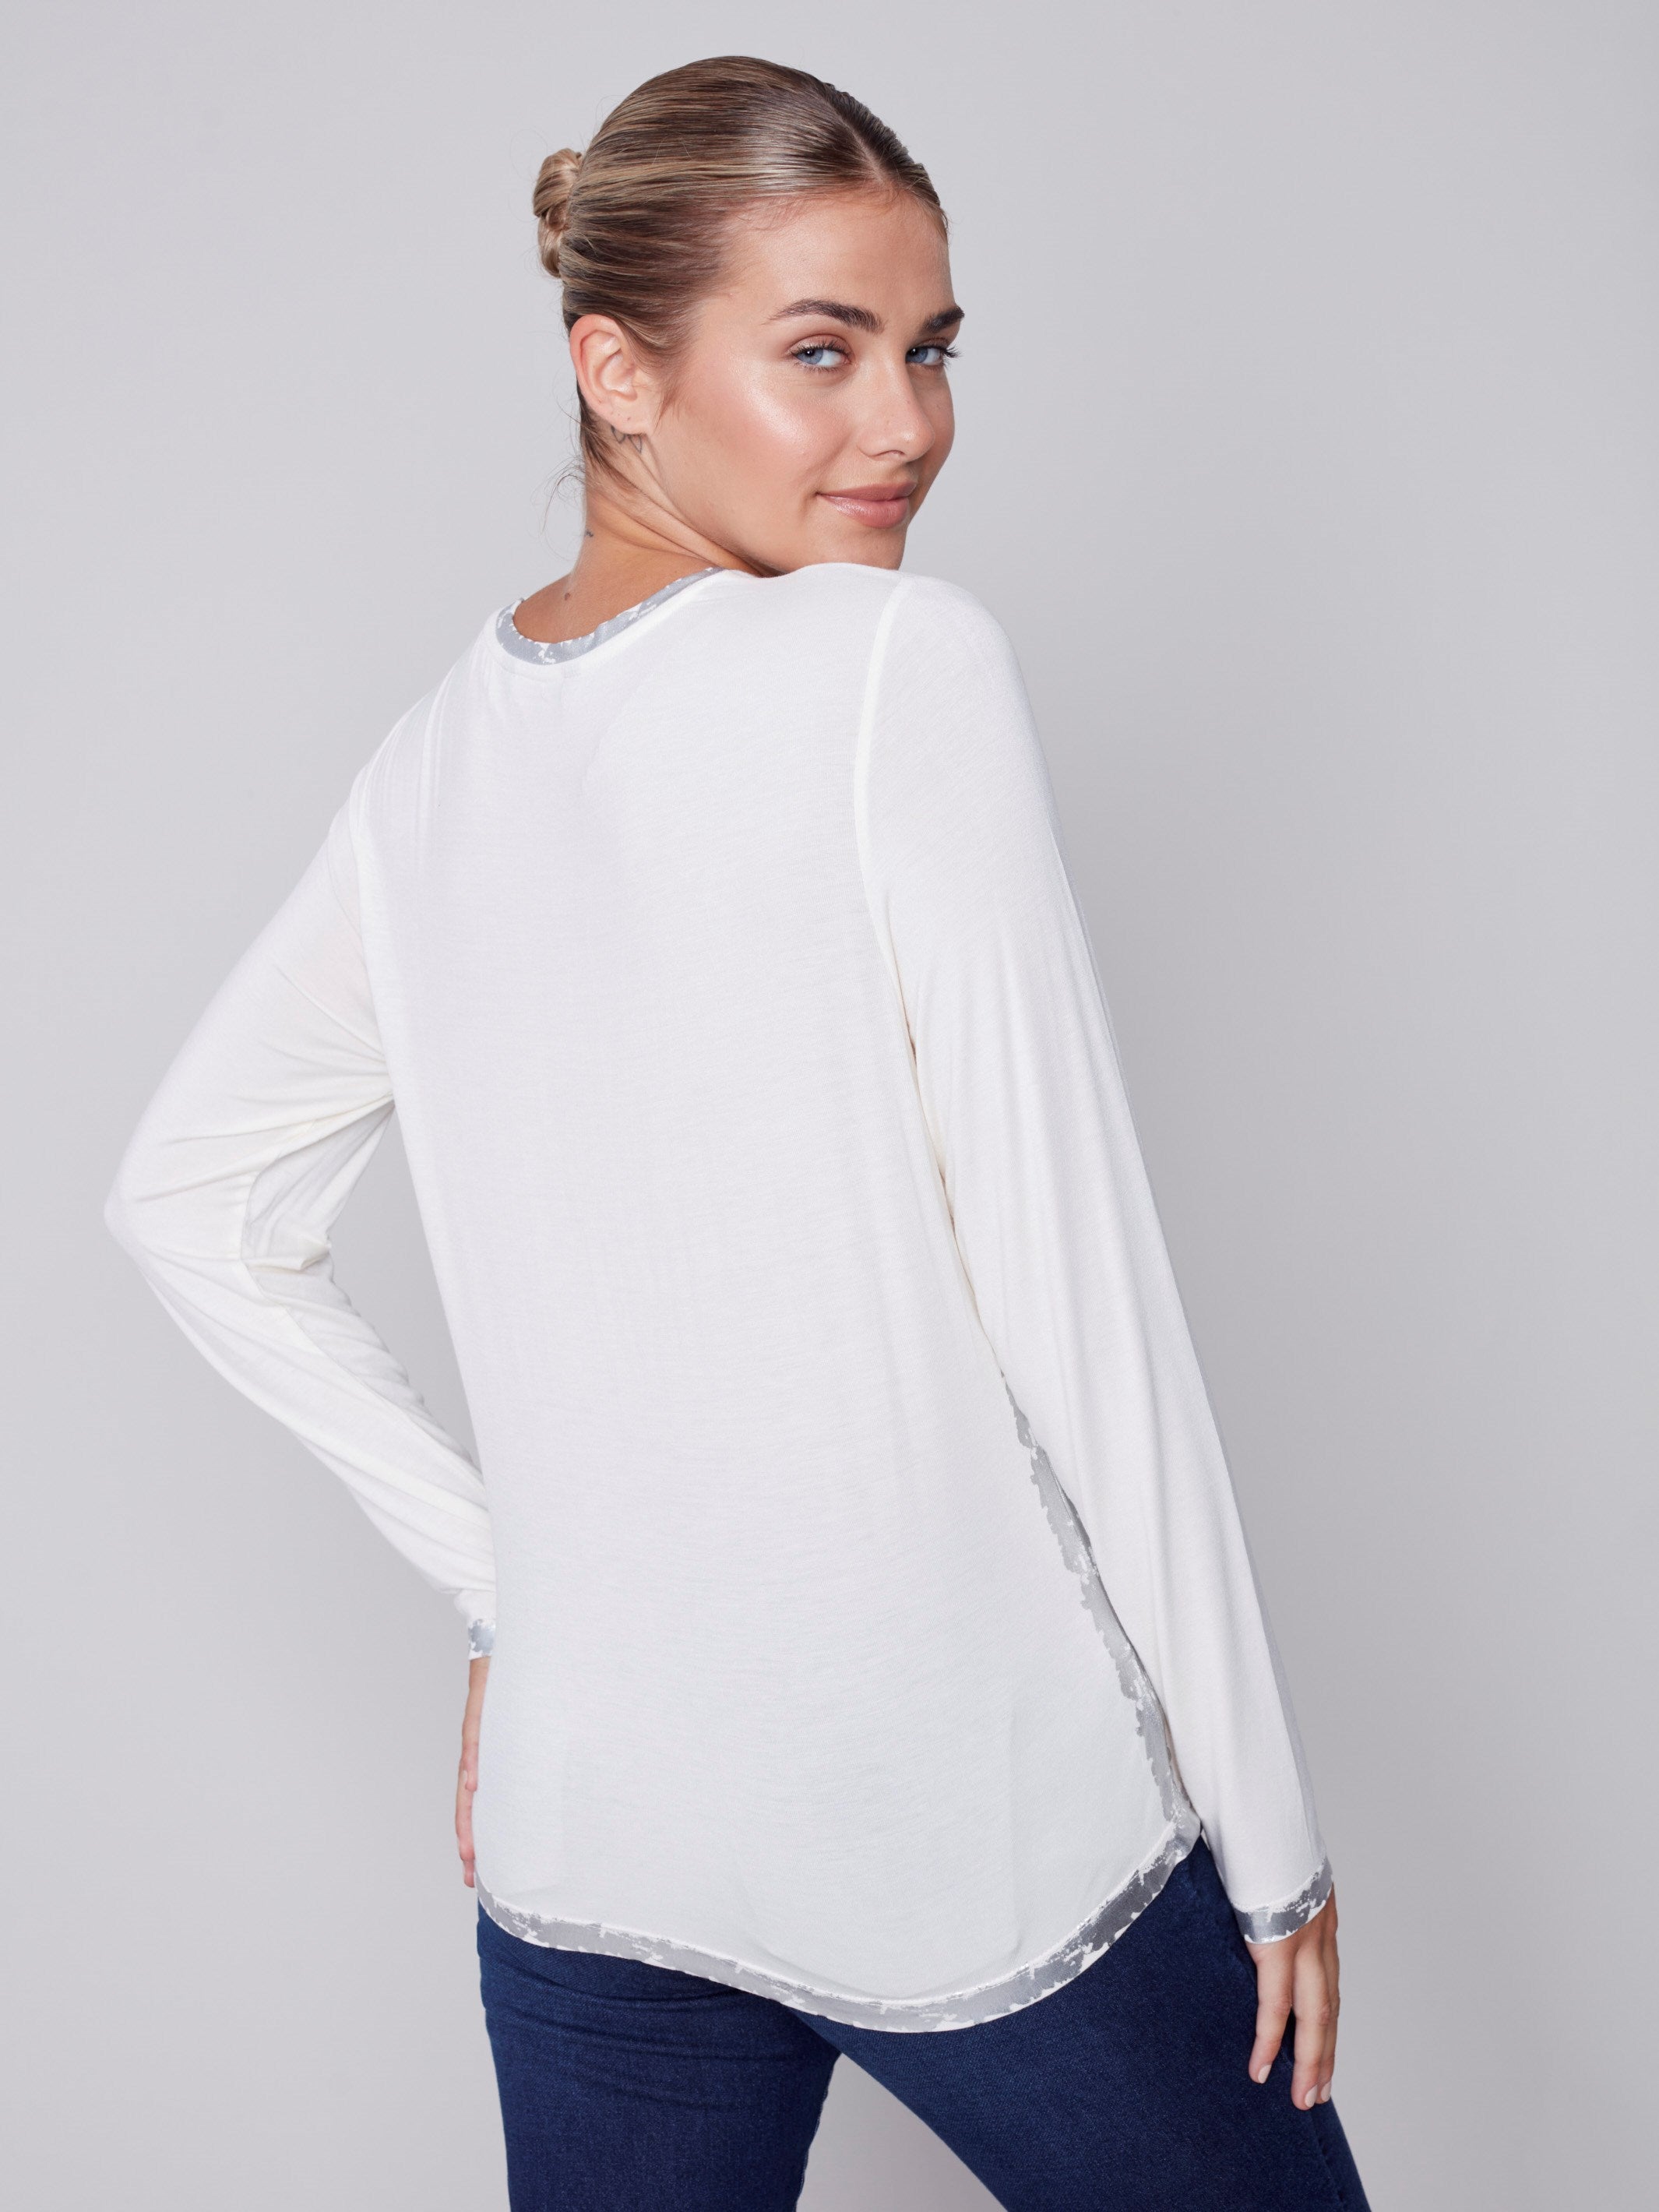 Long-Sleeved Top with Foil Print Detail - Cream